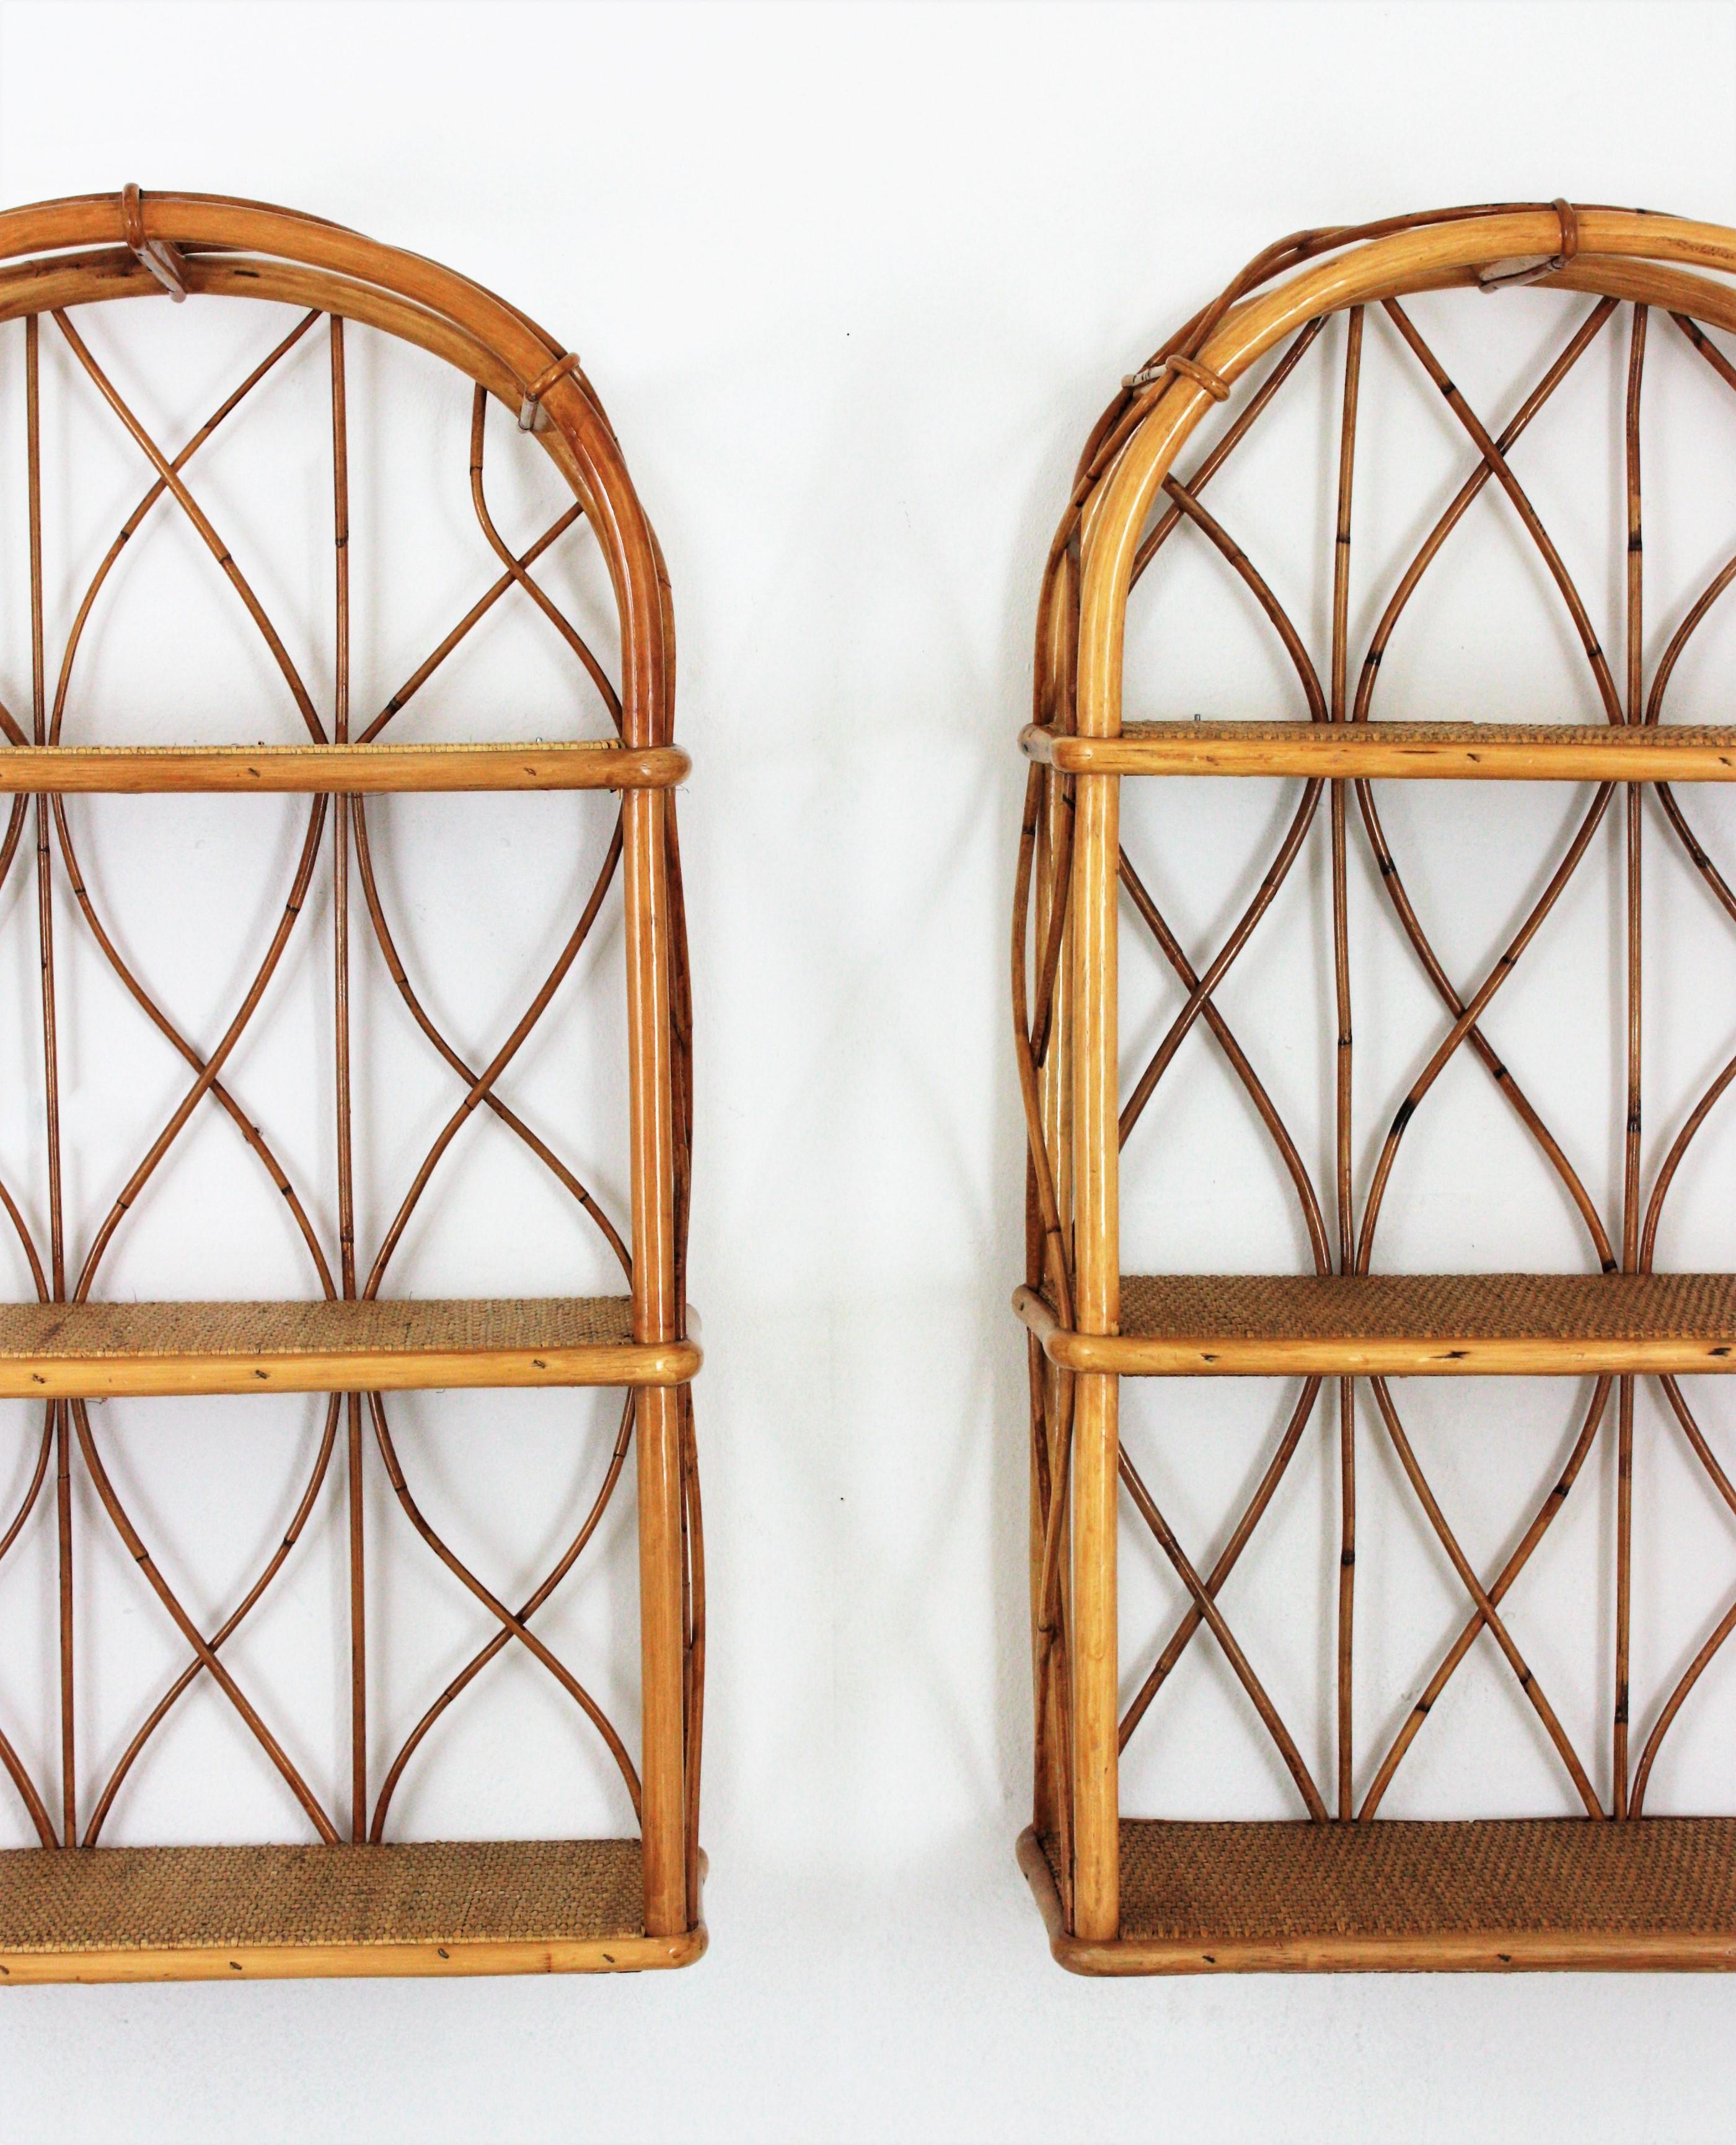 20th Century Pair of Bamboo and Rattan Wall Shelves with Round Tops